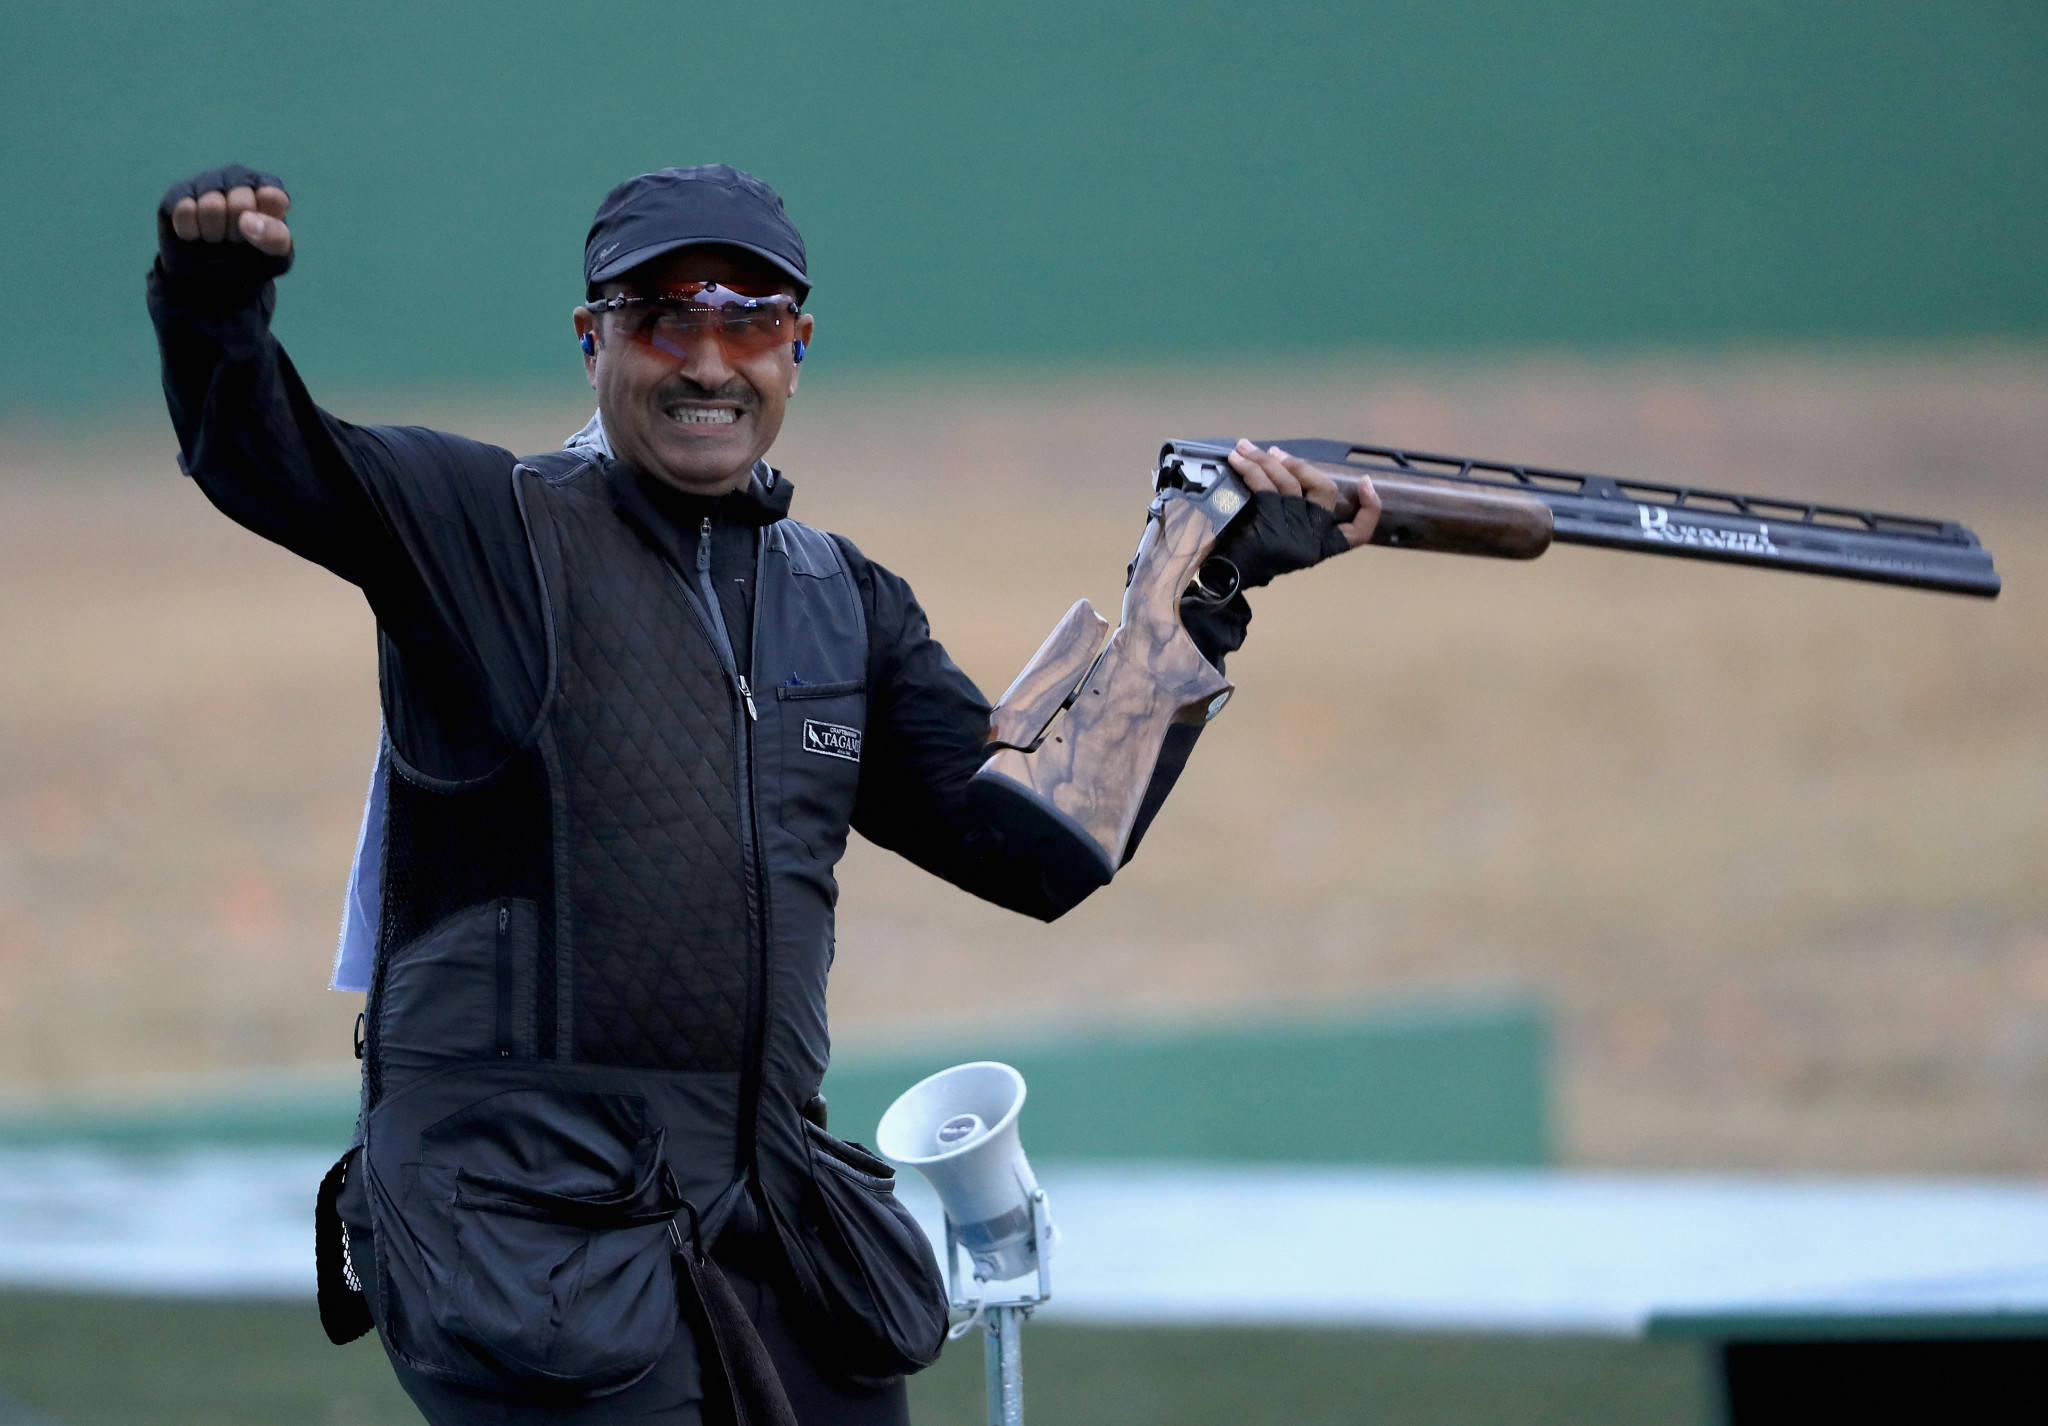 Fehaid Al-Deehani won a gold medal as an Independent Olympic Athlete in the men's double trap at Rio 2016 - it would have been Kuwait's first ever Olympic gold medal if the country had not been suspended ©Getty Images